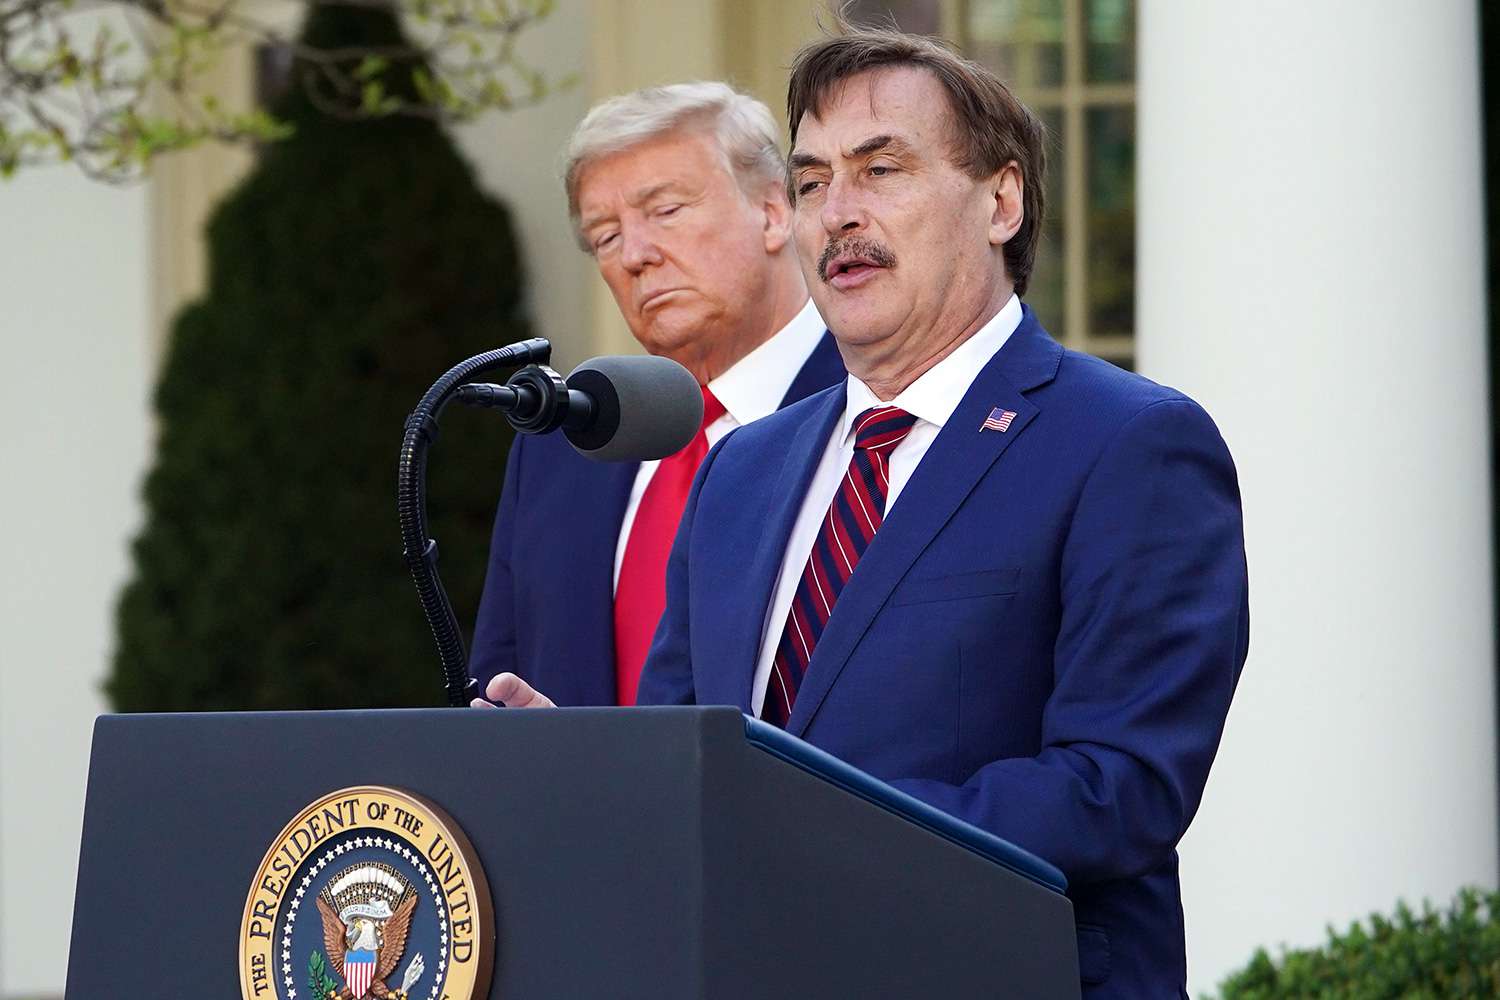 US President Donald Trump listens as Michael J. Lindell, CEO of MyPillow Inc., speaks during the daily briefing on the novel coronavirus